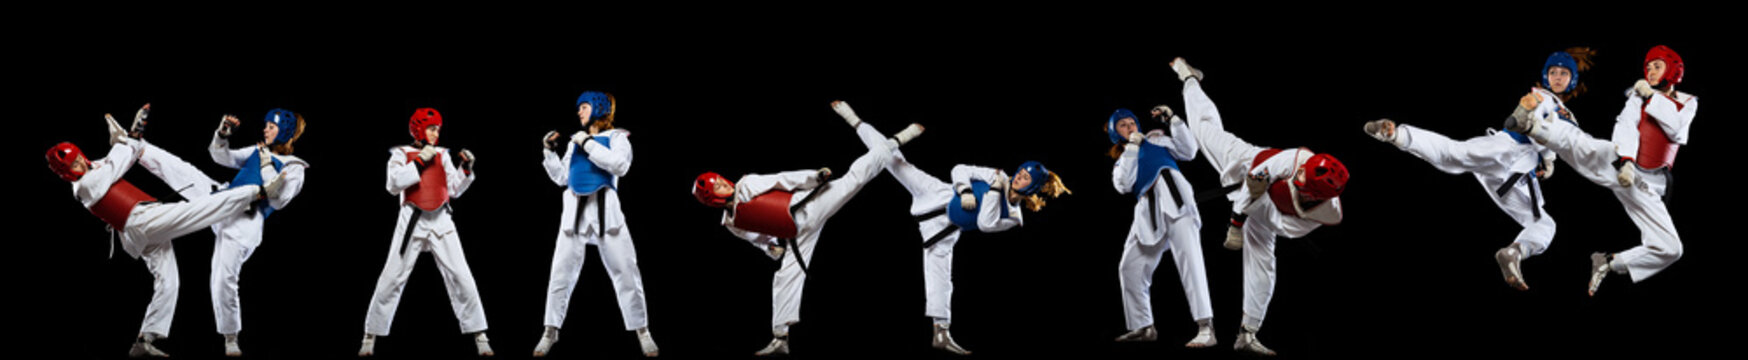 Flyer with two sportive girls, professional taekwondo athletes wearing doboks and helmets practicing isolated on black background. Collage